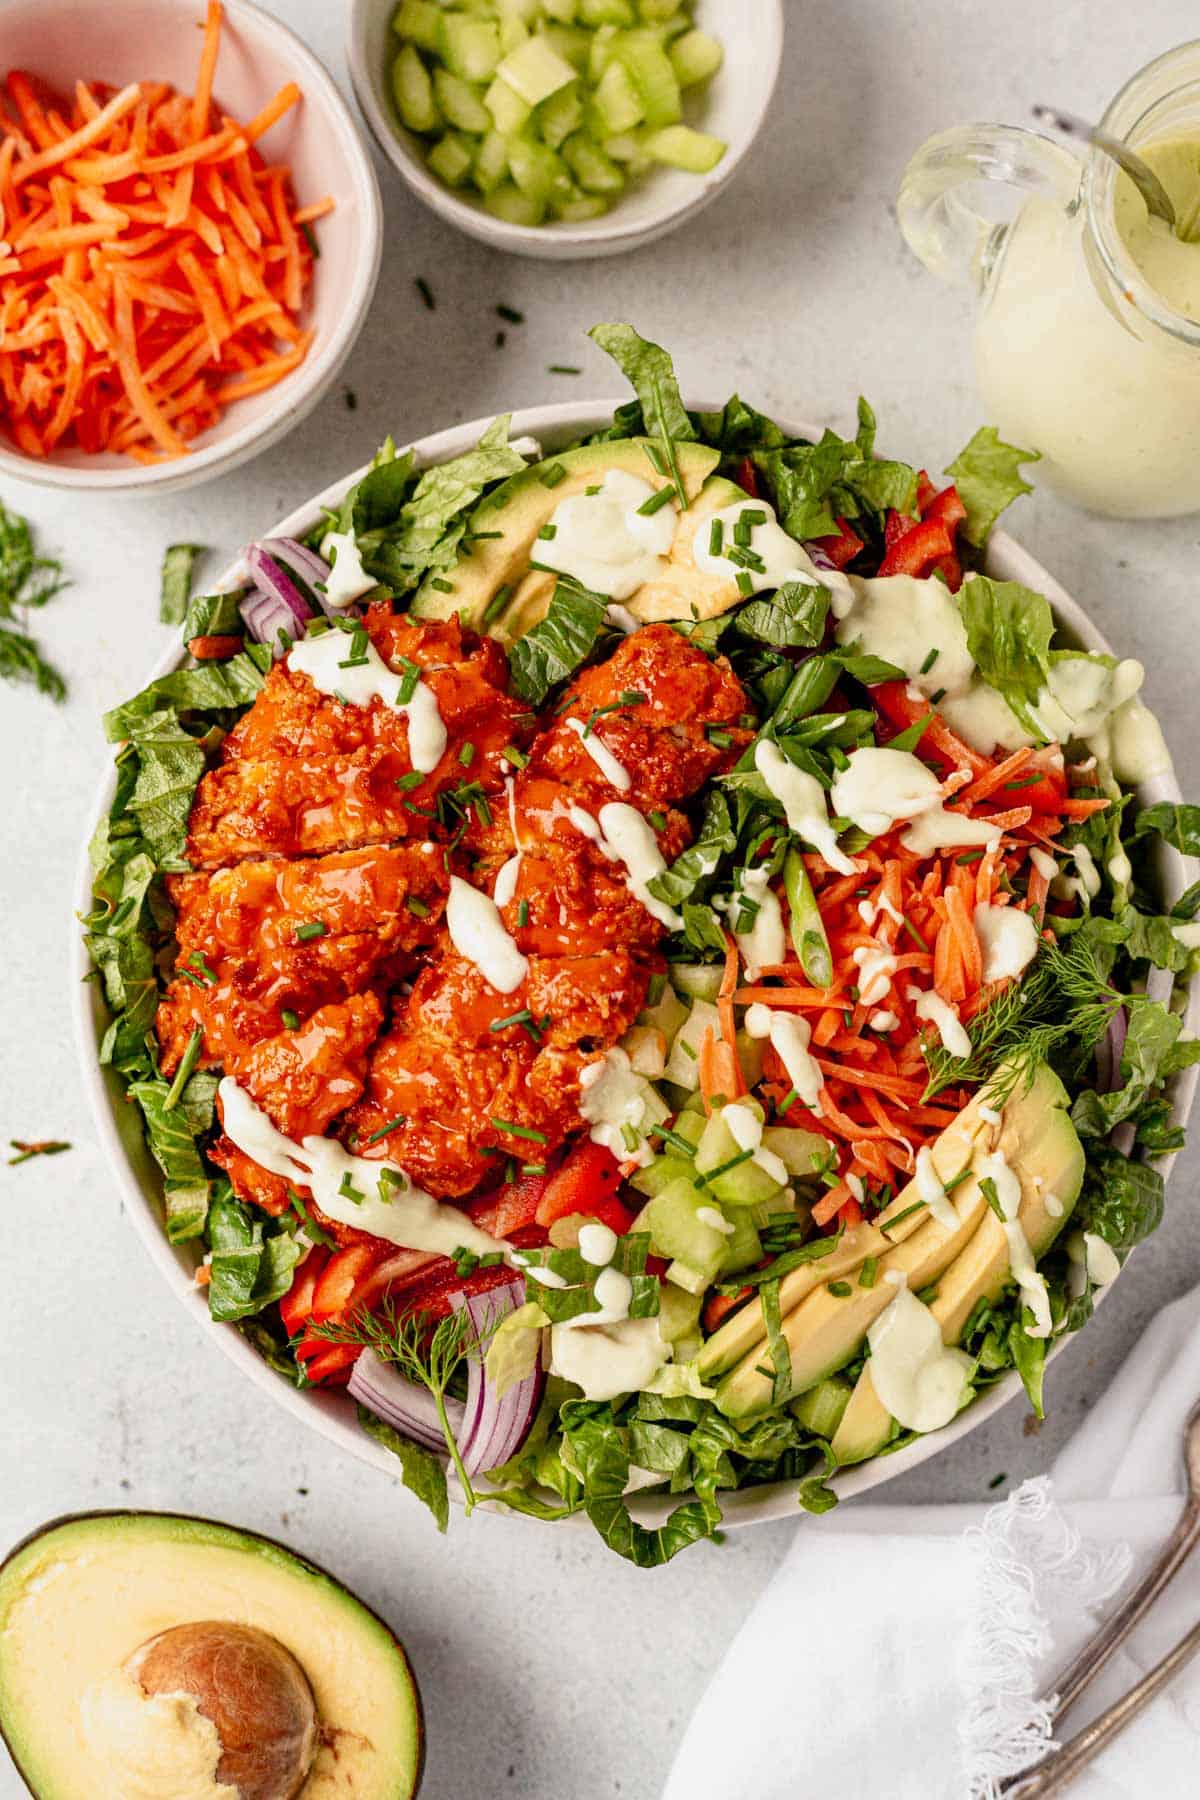 avocado ranch dressing drizzled on top of buffalo chicken salad